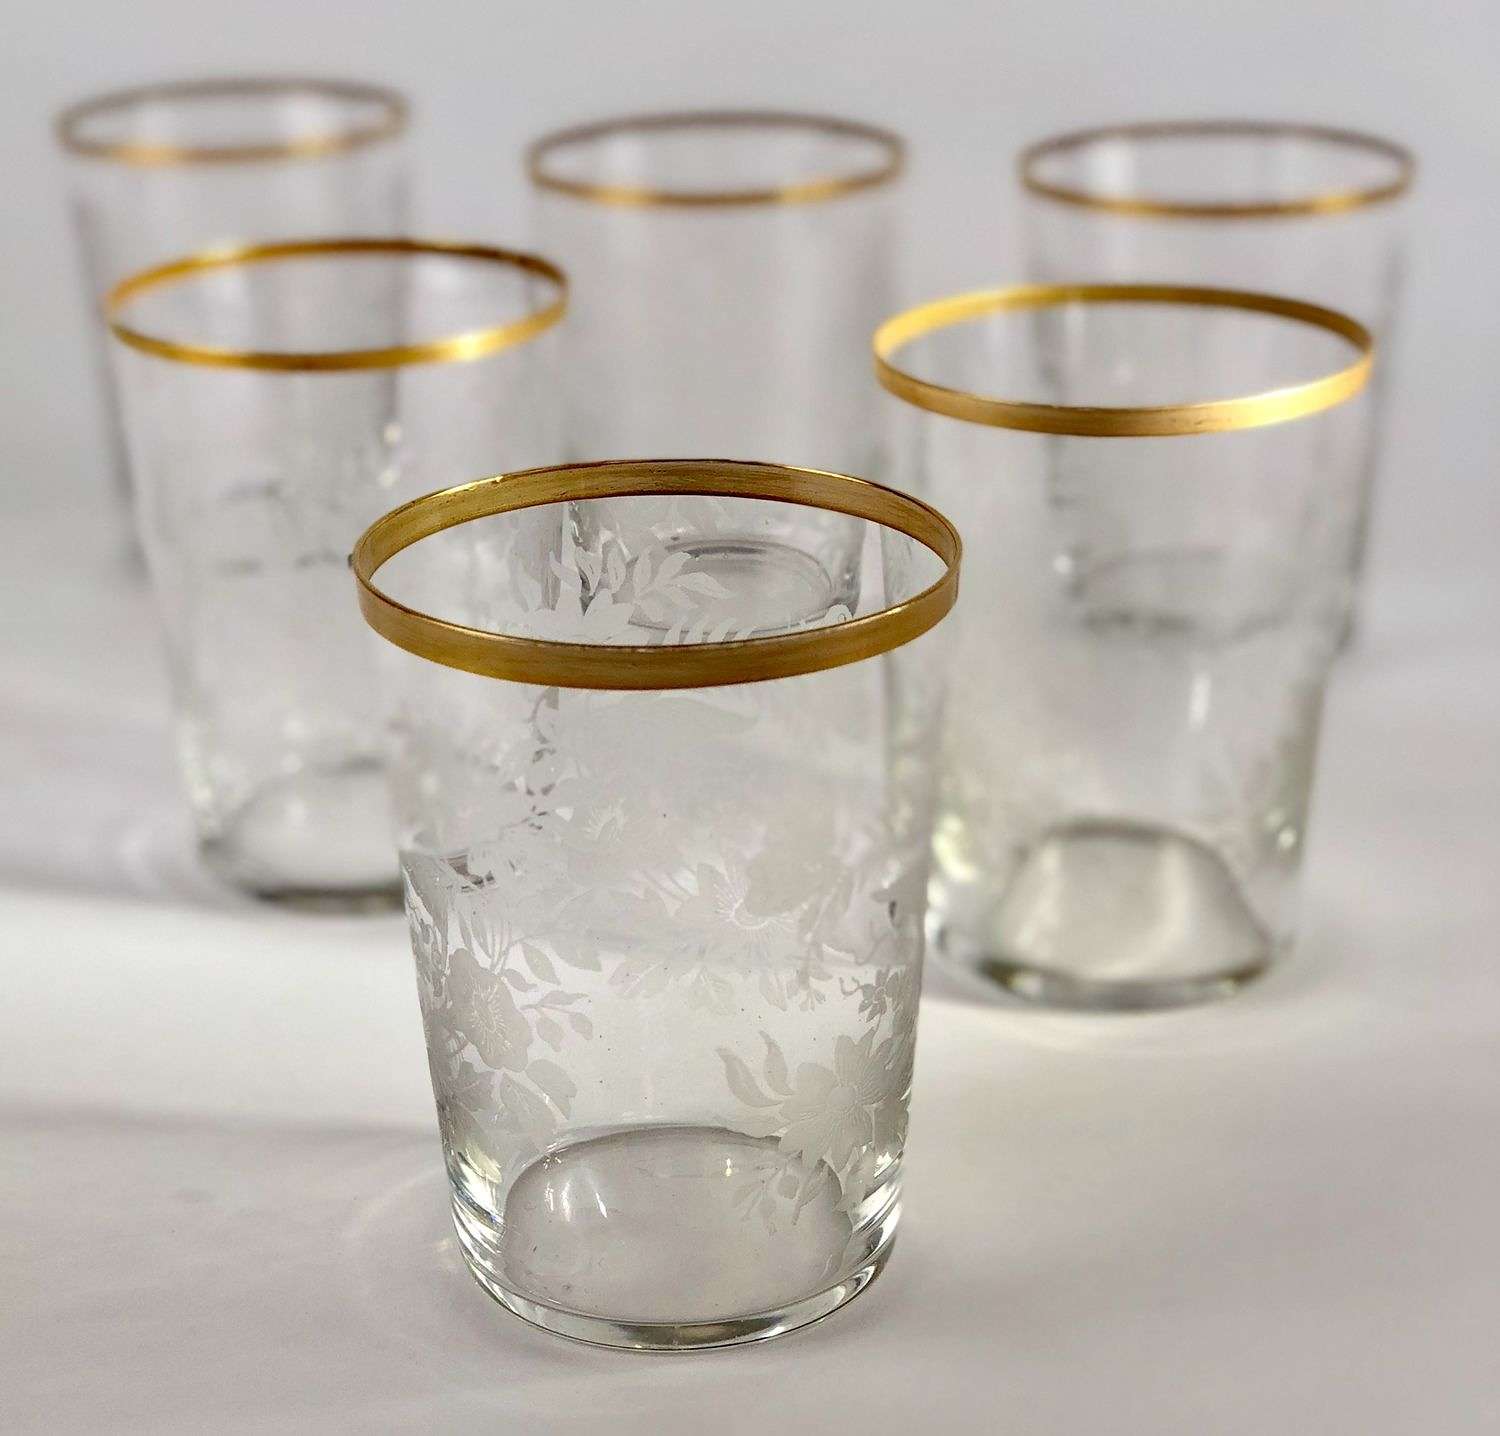 1920s gold rimmed floral & butterfly etched glass tumblers